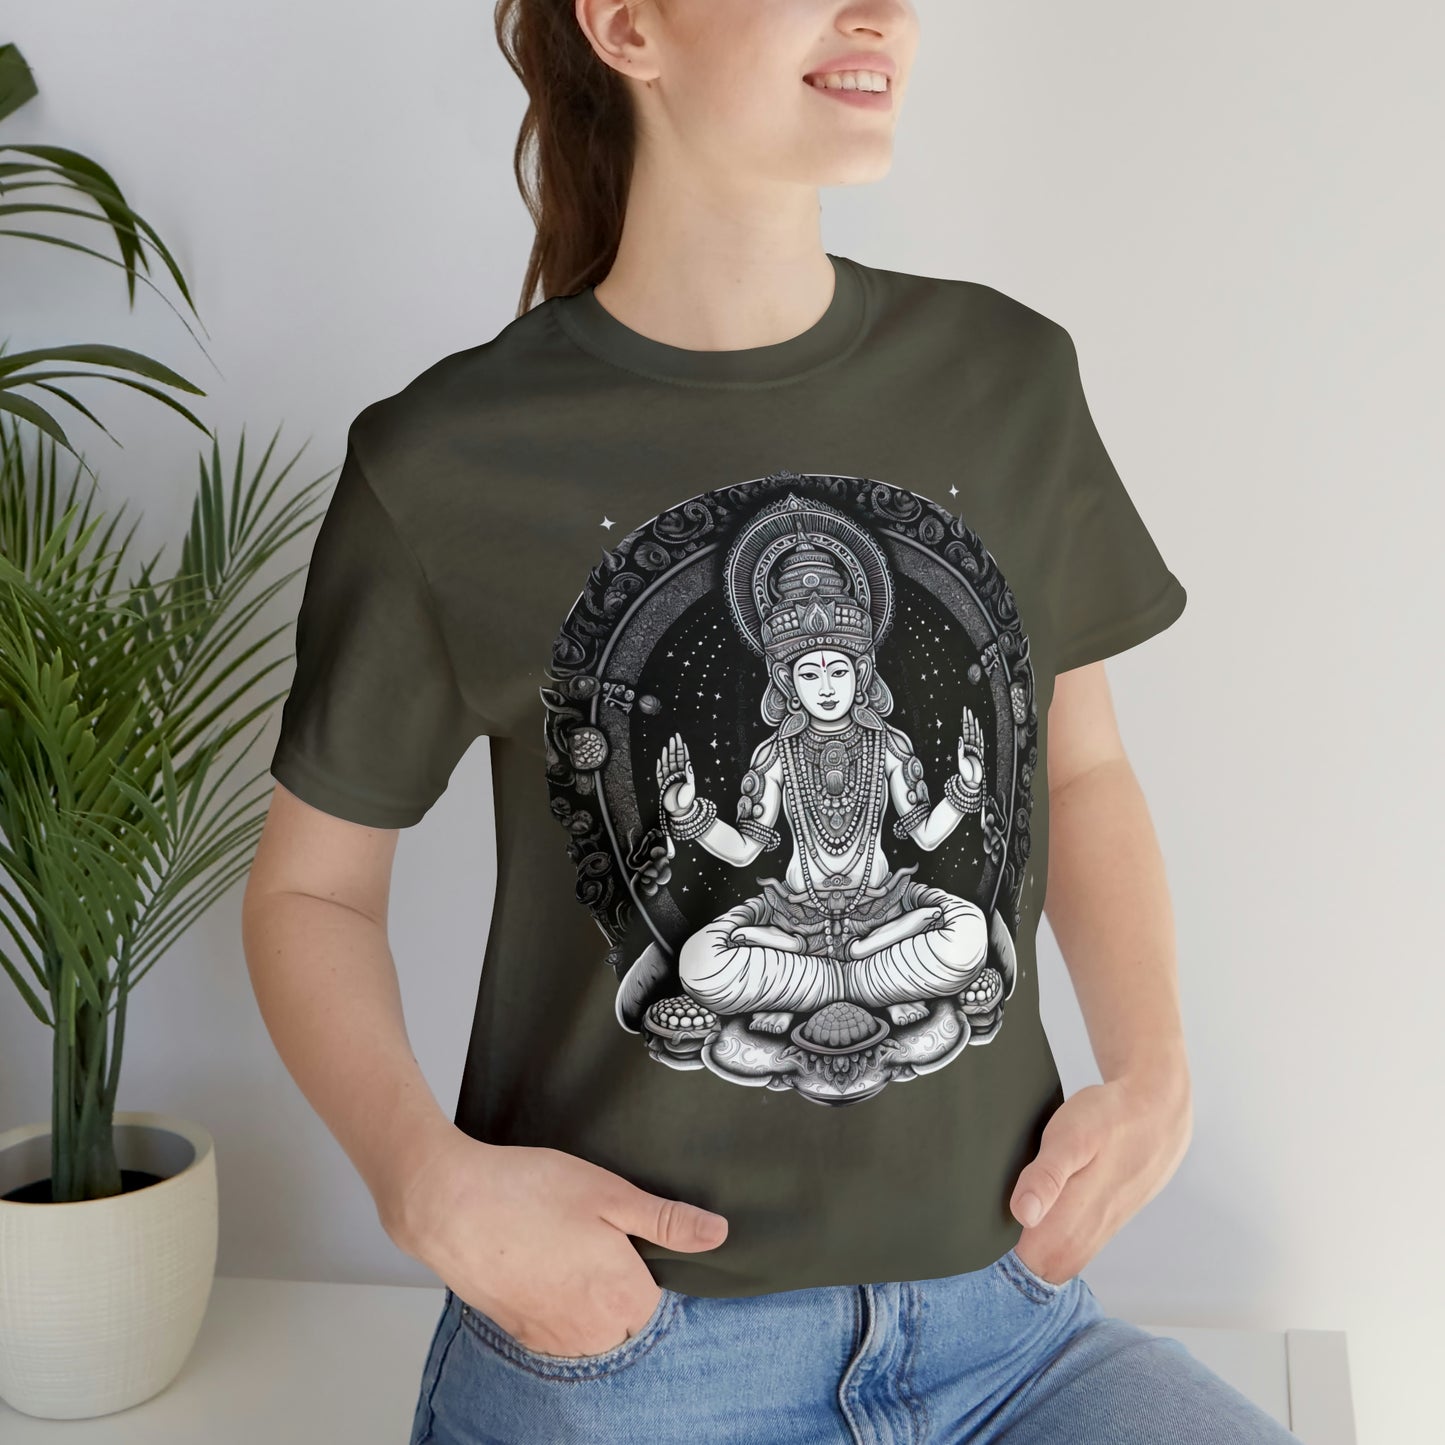 Cosmic Buddha: Unveil Your True Self on the Edge of Two Worlds with Spiritual Enlightenment